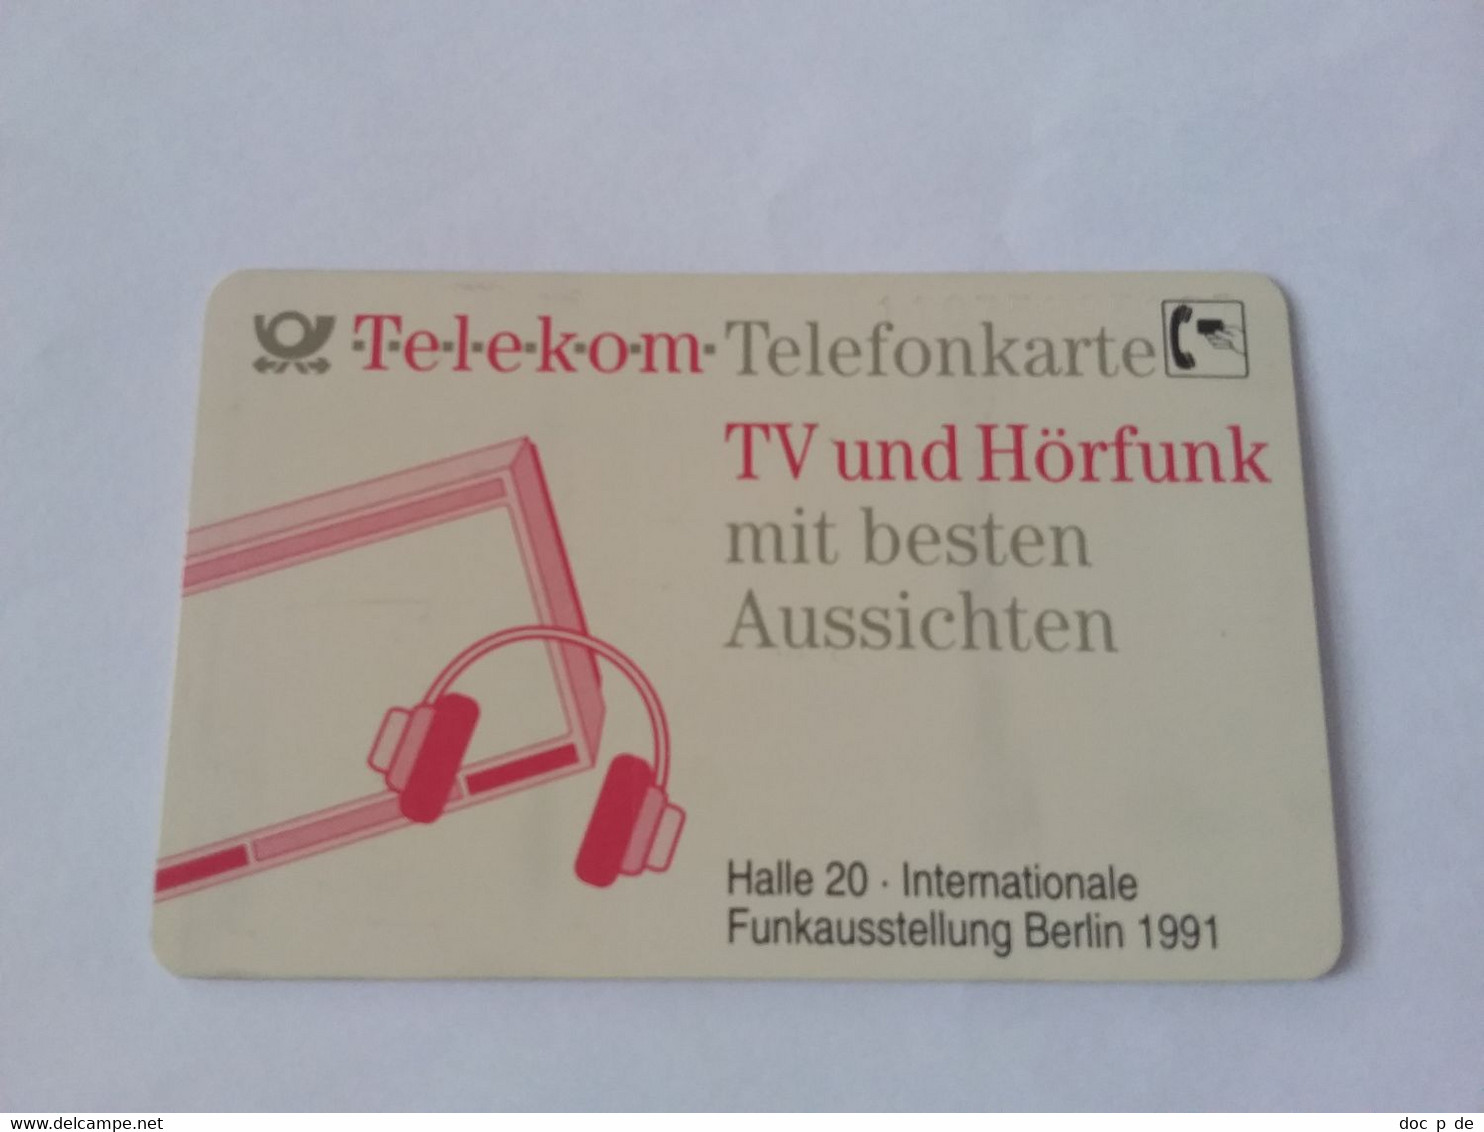 Germany - A 25/91 - Verbindungen - Mobilfunk Mit System - Antenne - A + AD-Series : Publicitaires - D. Telekom AG